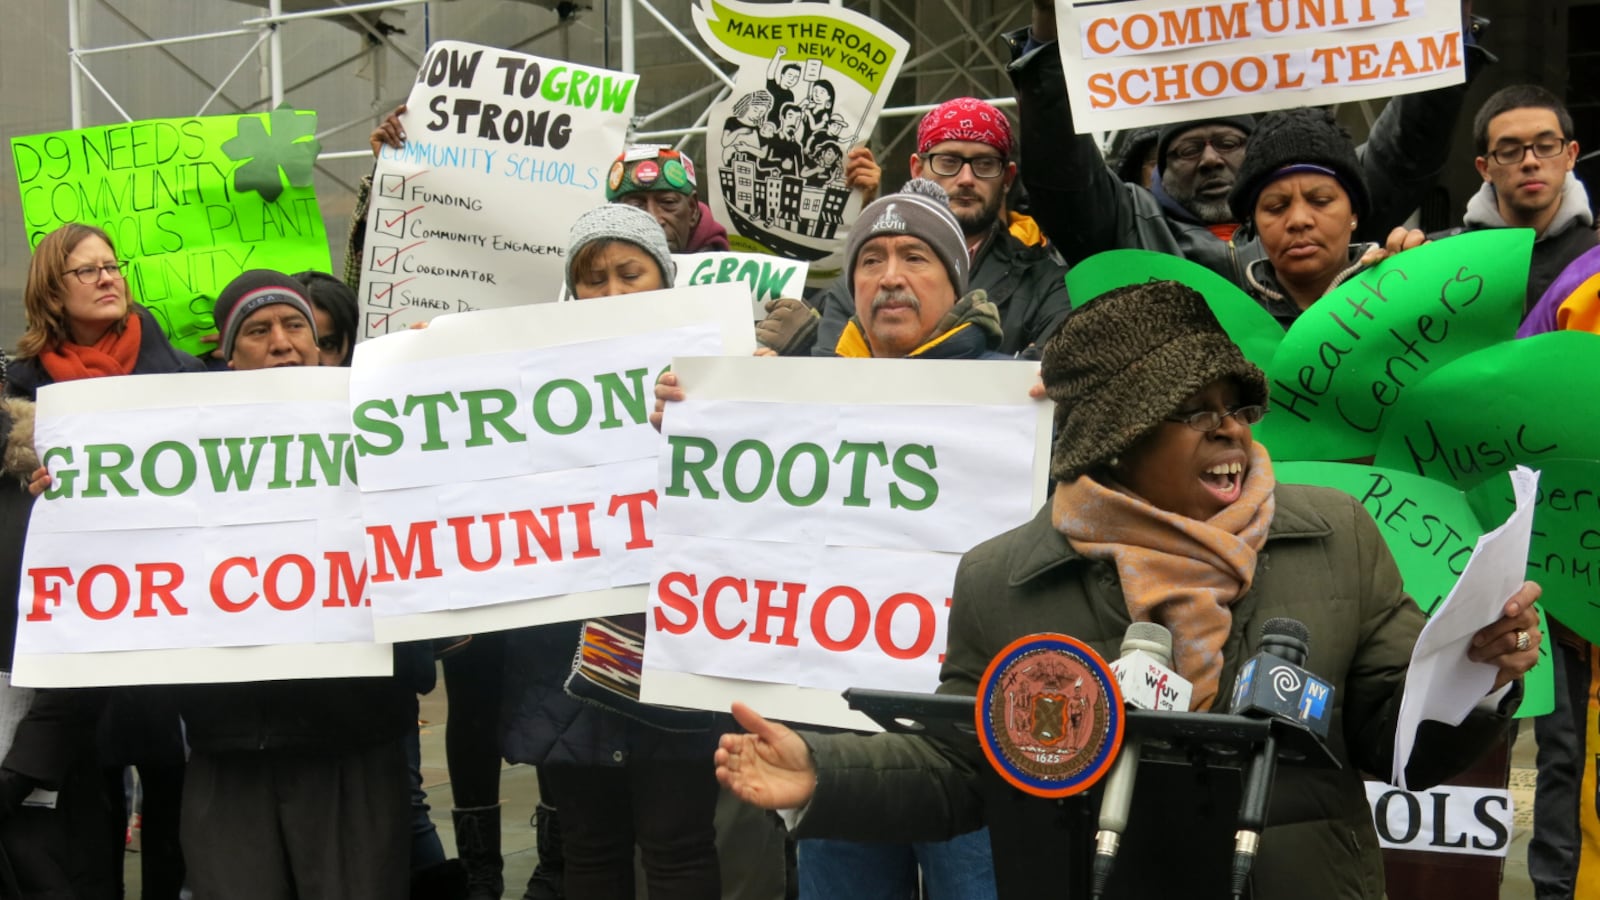 Claudette Agard, a member of the Coalition for Educational Justice, called on the city to adopt a formal community school policy.